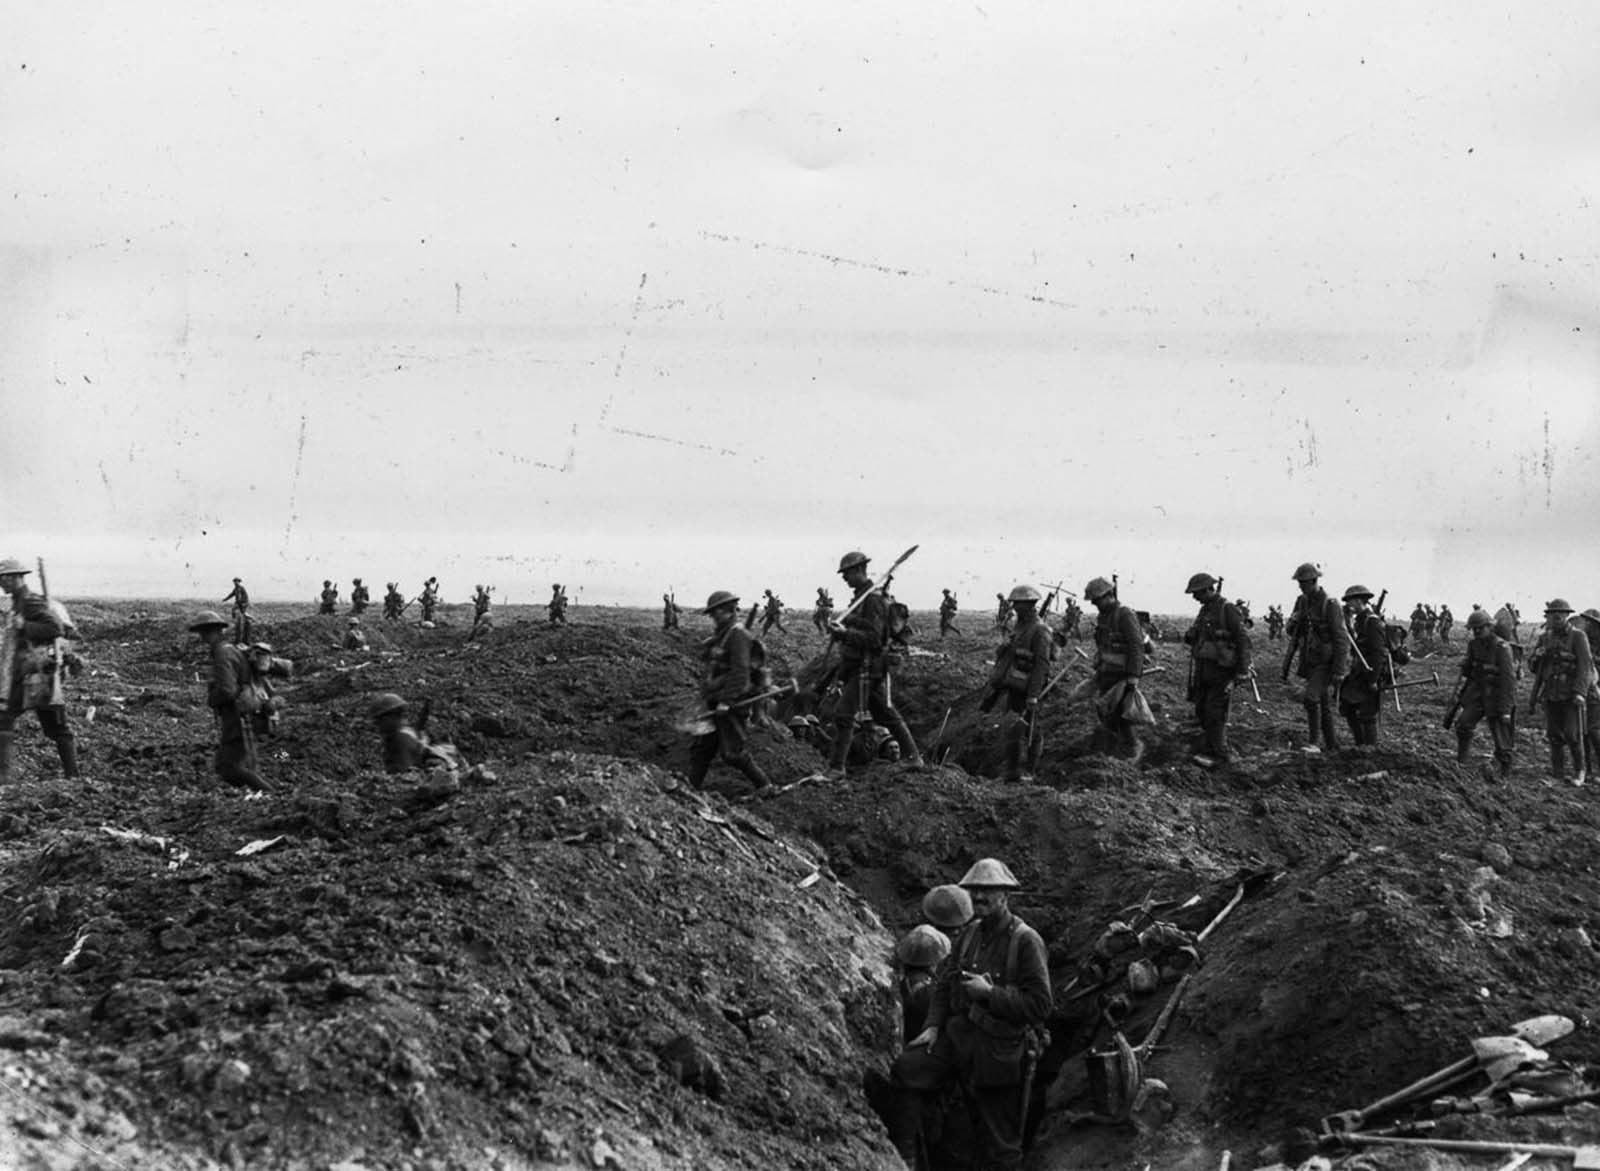 Reinforcements cross the old German front line during the advance towards Flers. September 15, 1916.